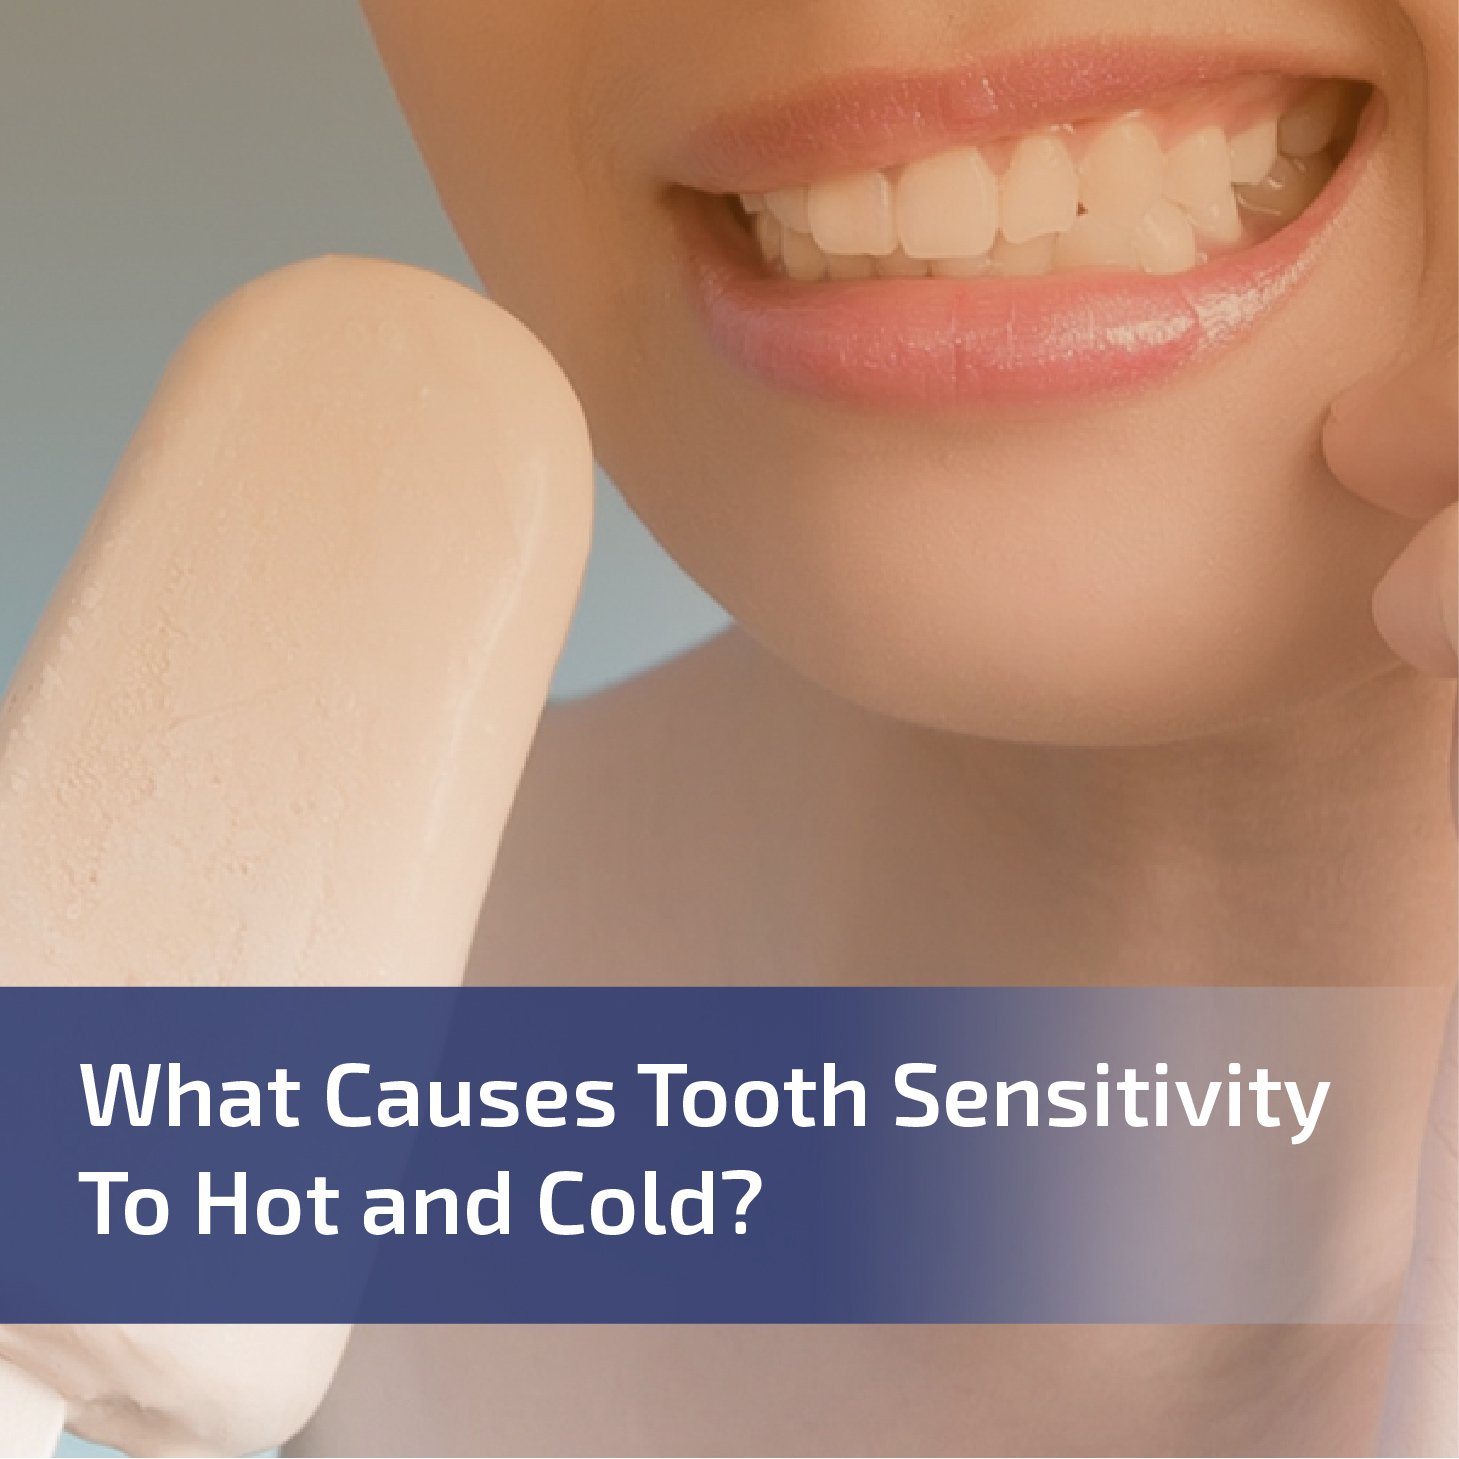 What Causes Tooth Sensitivity to Hot and Cold?